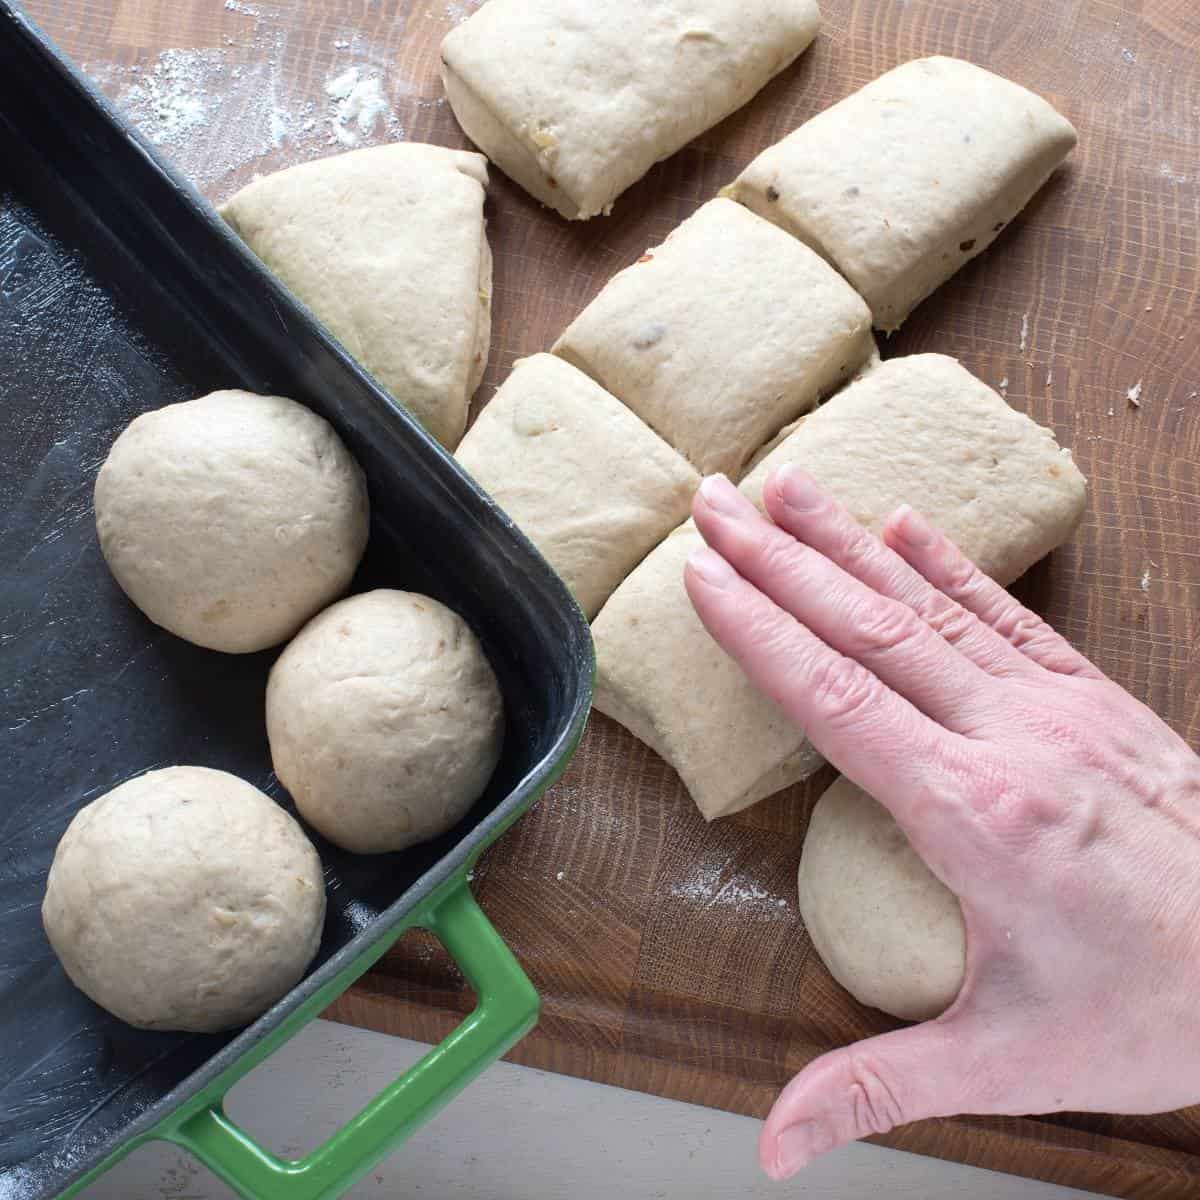 Rolling a piece of a yeast dough into a ball, making bread rolls.